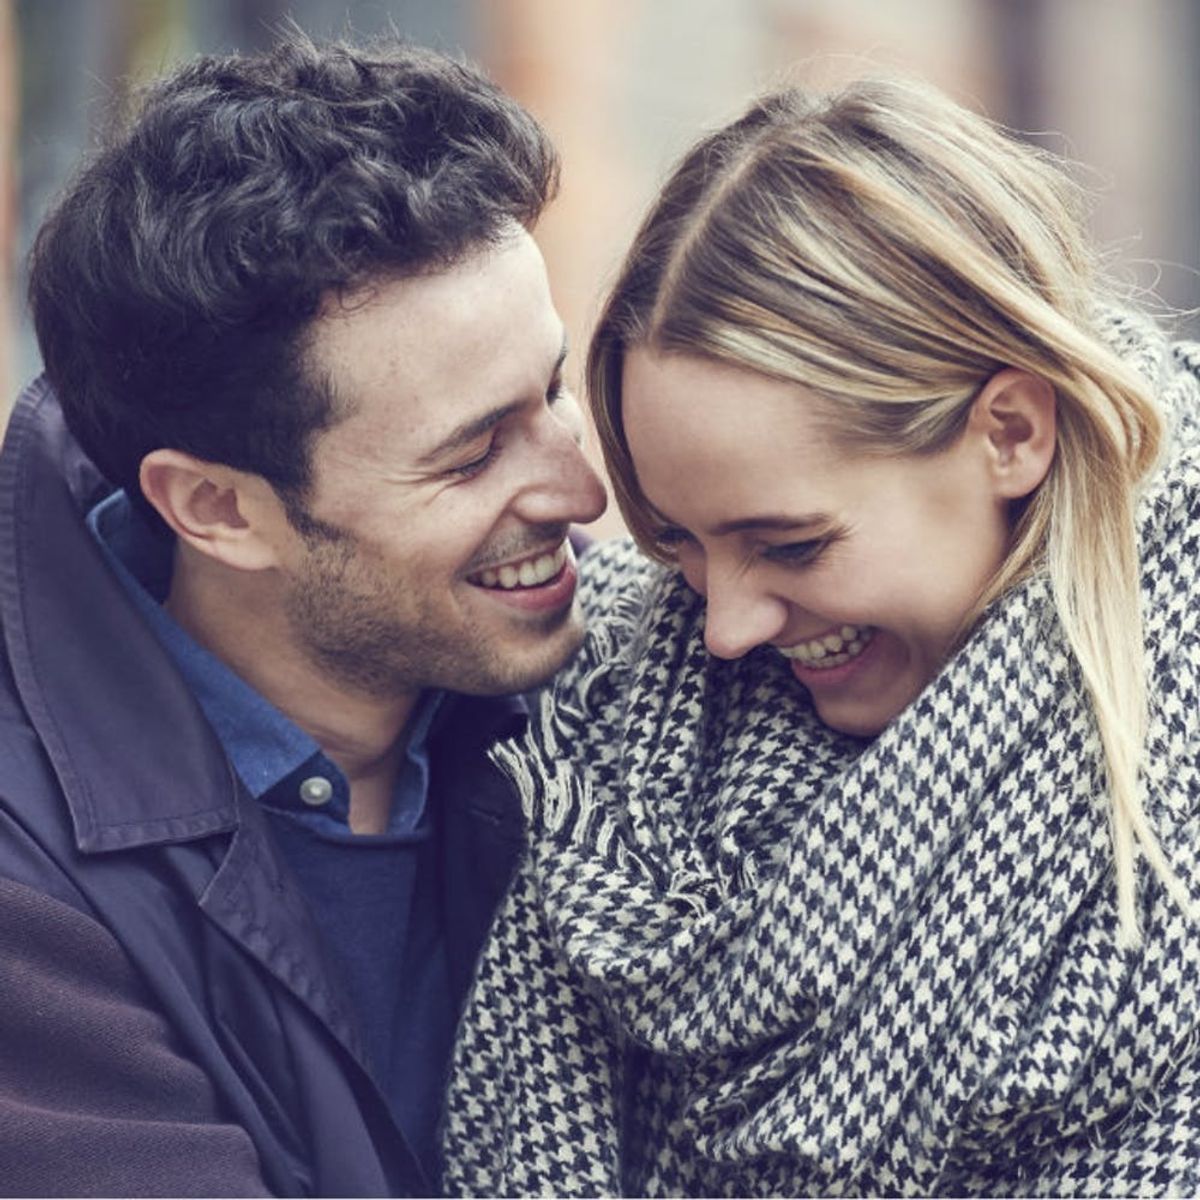 6 Secrets You Don’t Have to Share With Your Partner